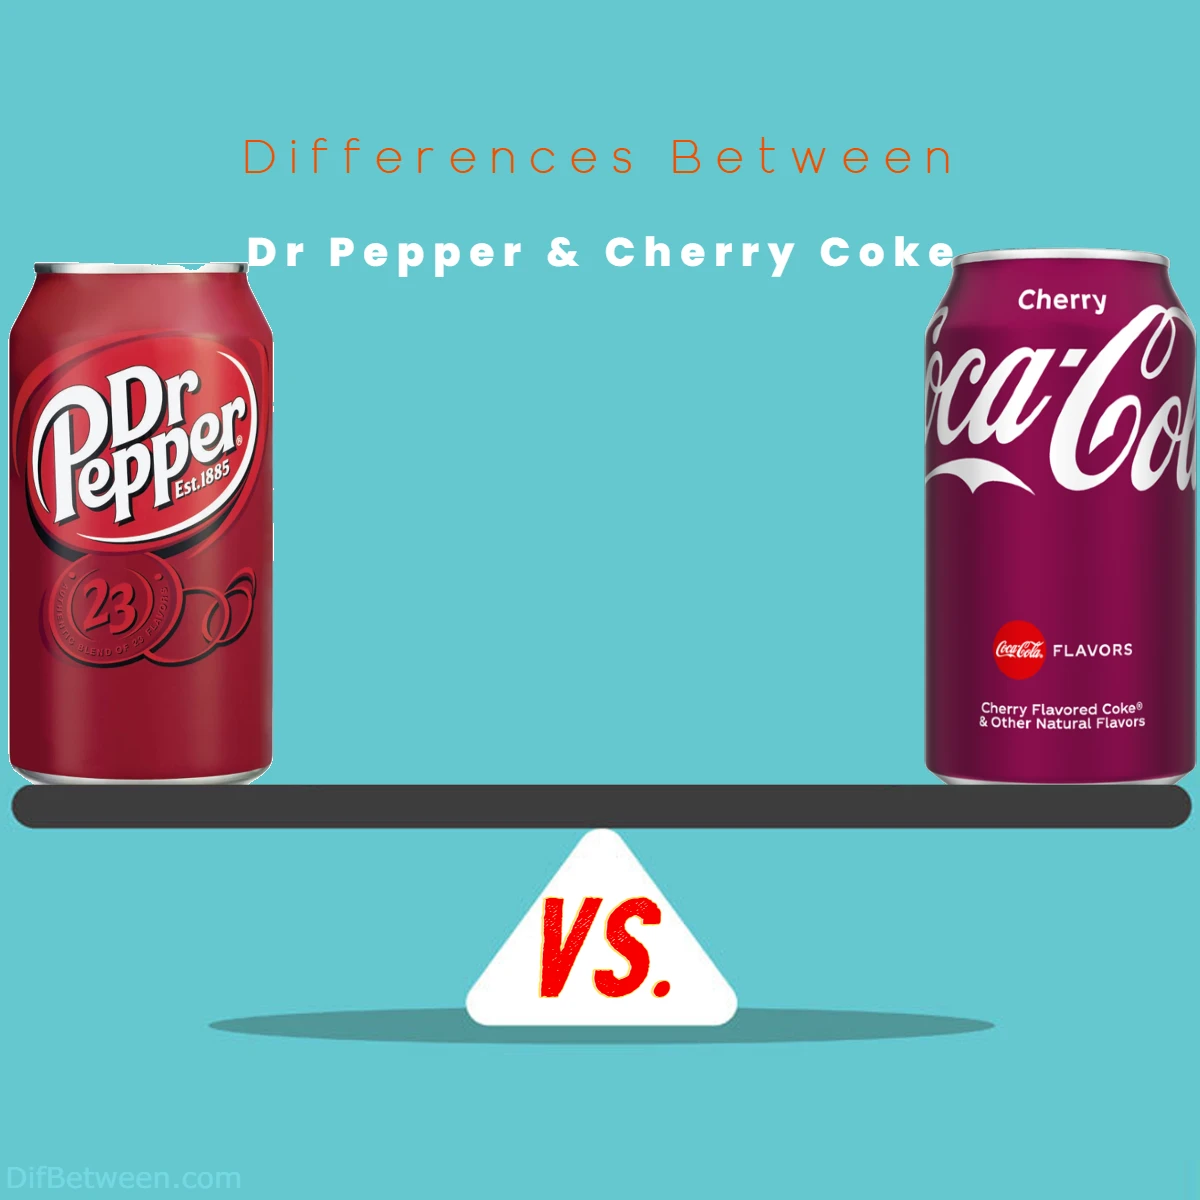 Difference Between Cherry Coke and Dr Pepper